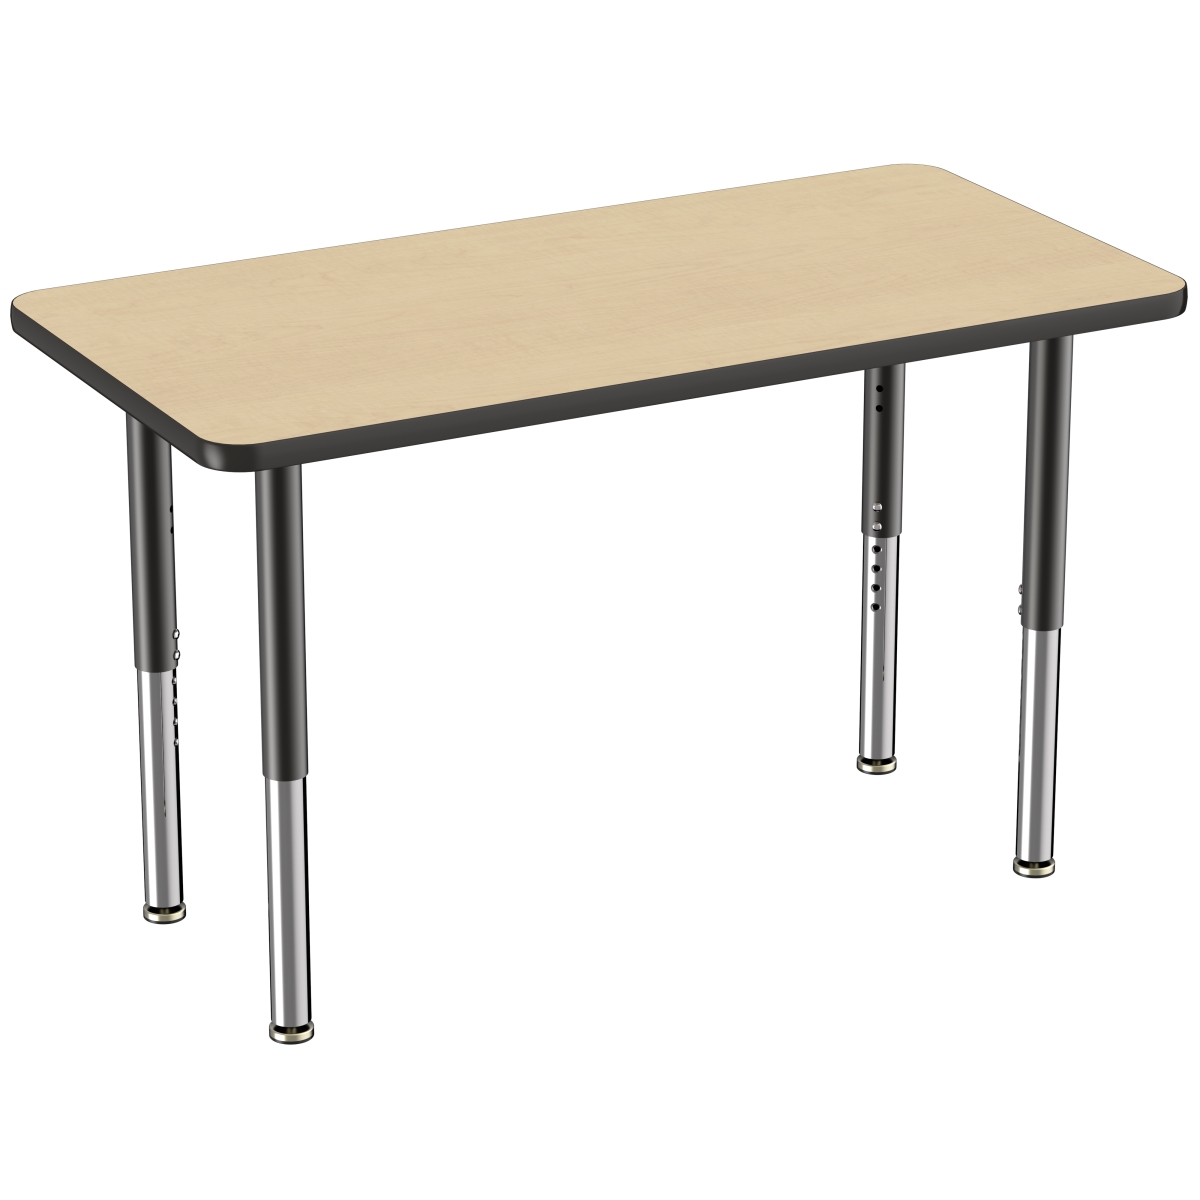 10010-mpbk 24 X 48 In. Rectangle T-mold Adjustable Activity Table With Super Leg - Maple & Black